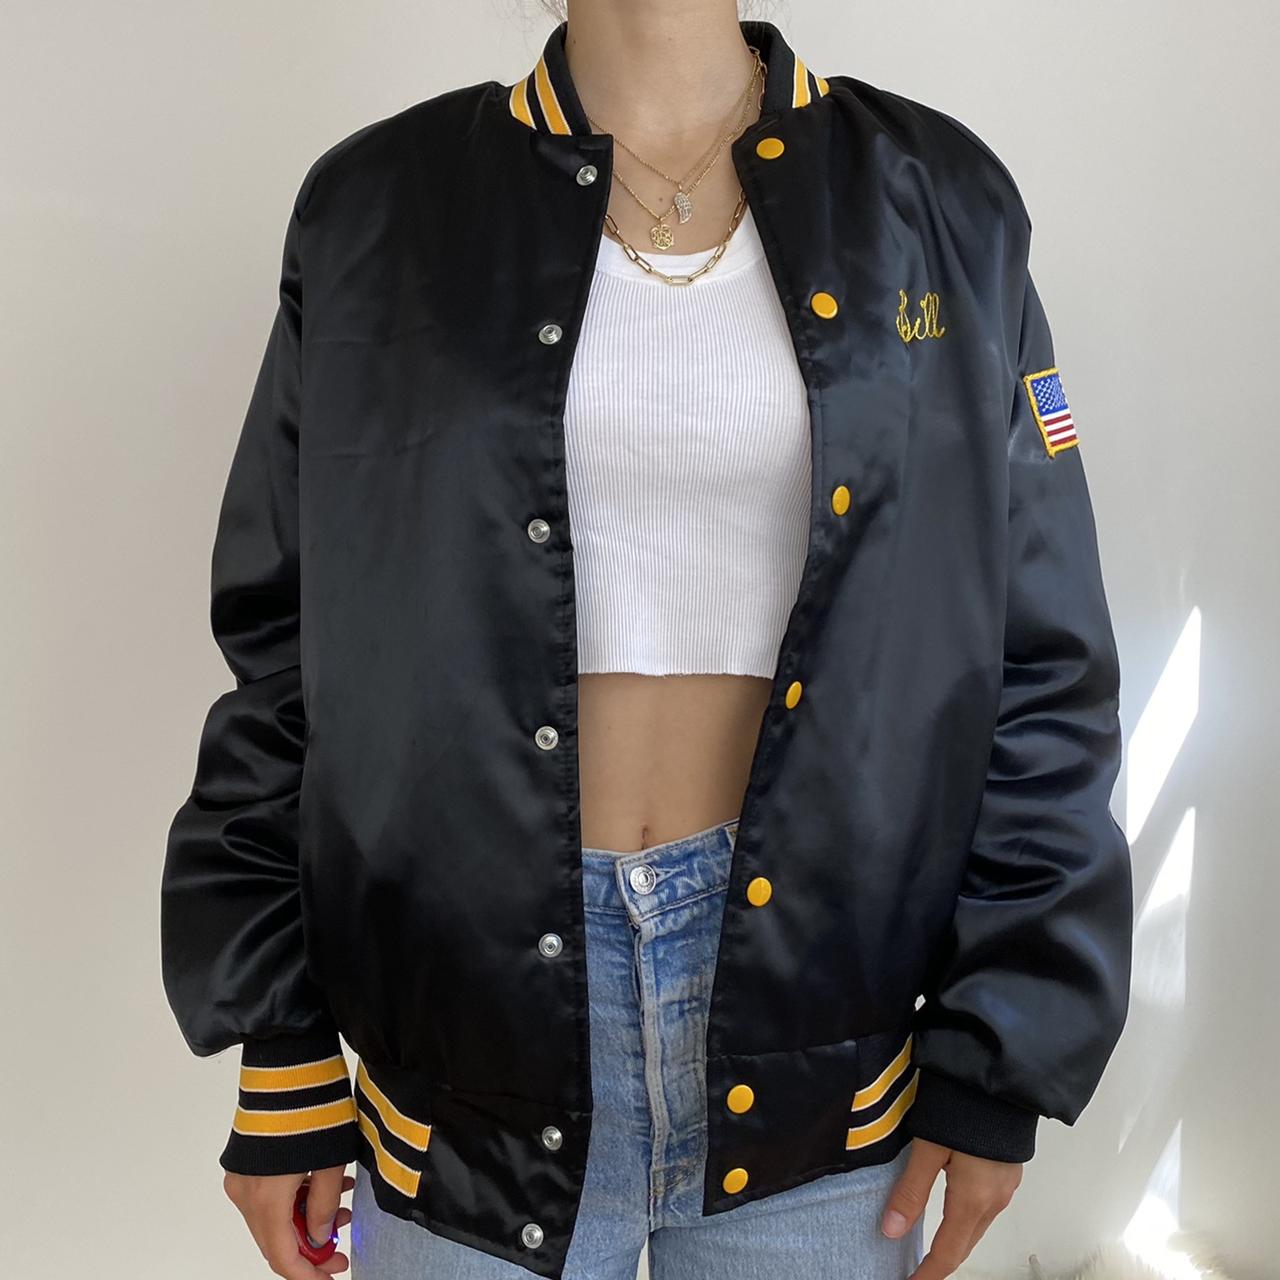 SUPER COOL 1980s Authentic Vintage DAPPER DAN jackets available at Renee's  Resale Limited stock- many styles and sizes from SM- 3X Call or DM for, By Renee's Resale Clothing Outlet